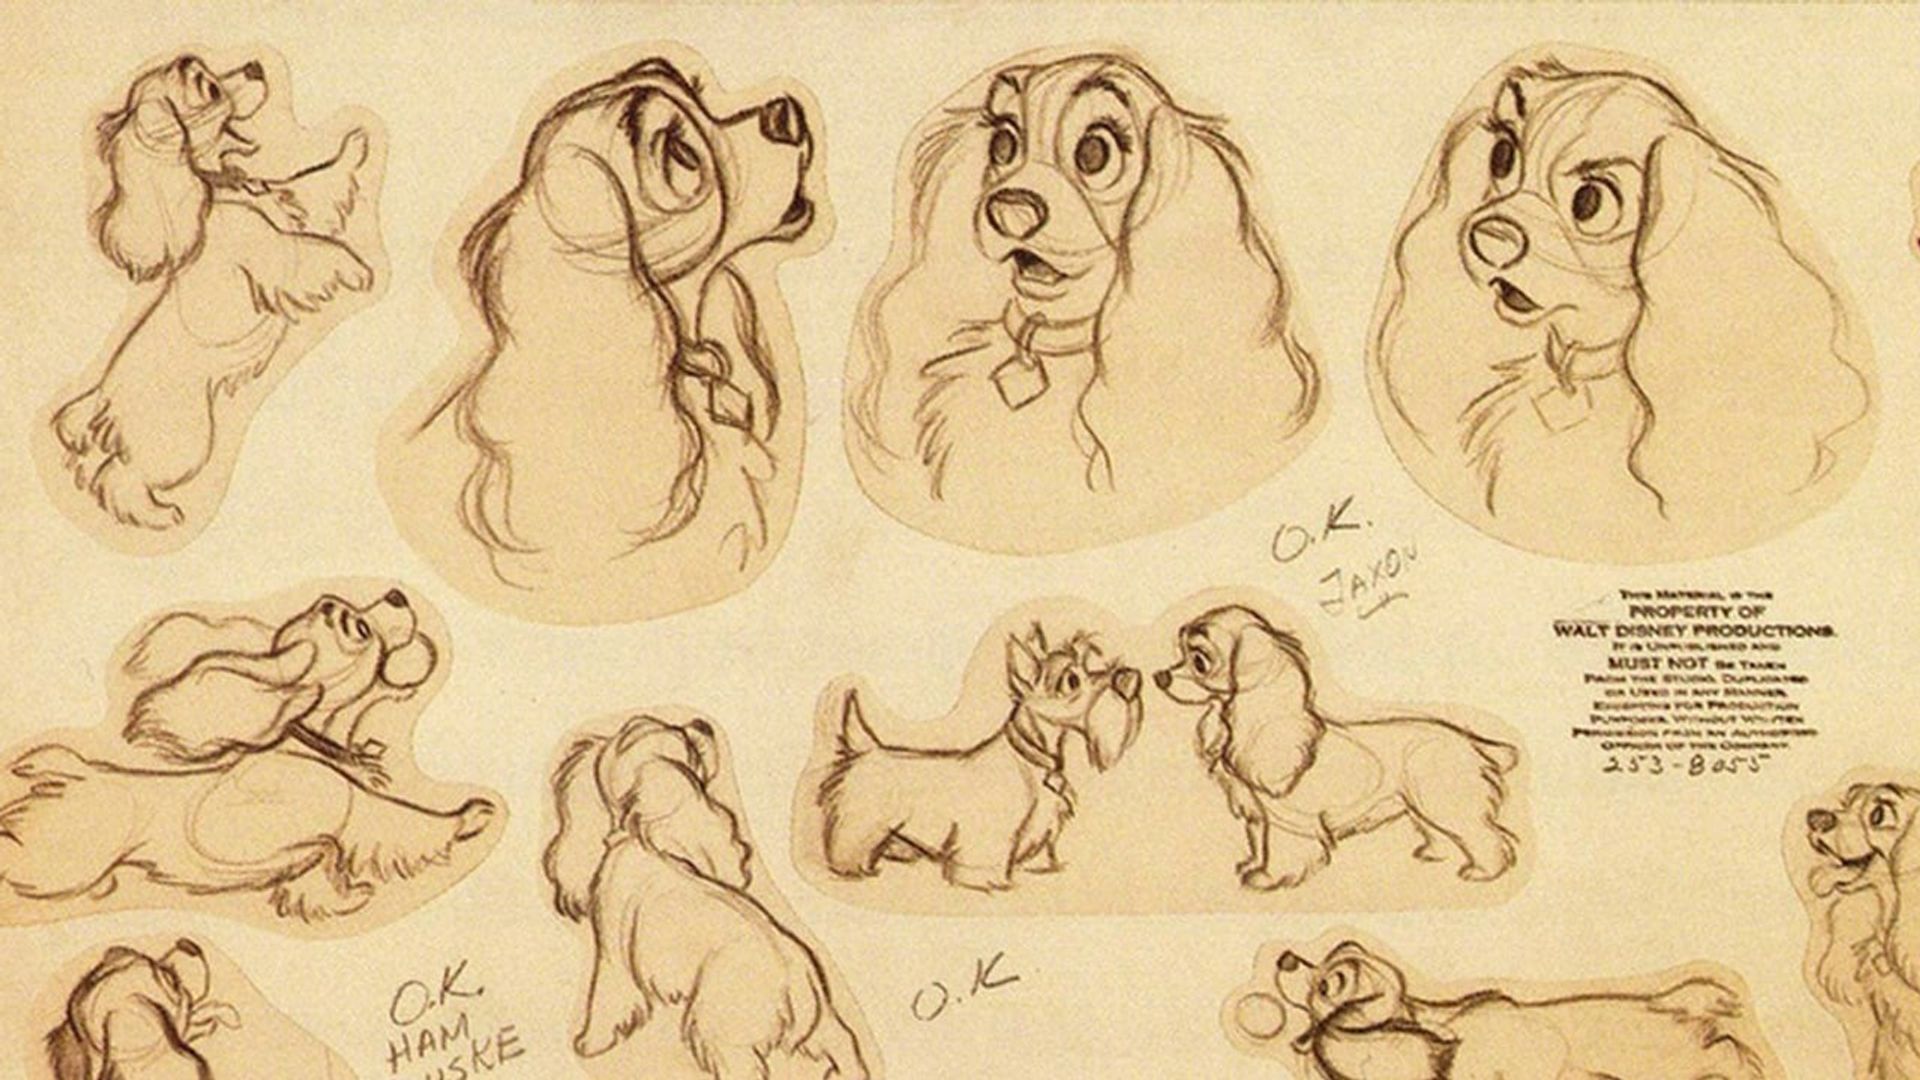 Lady's Pedigree: The Making of 'Lady and the Tramp' background